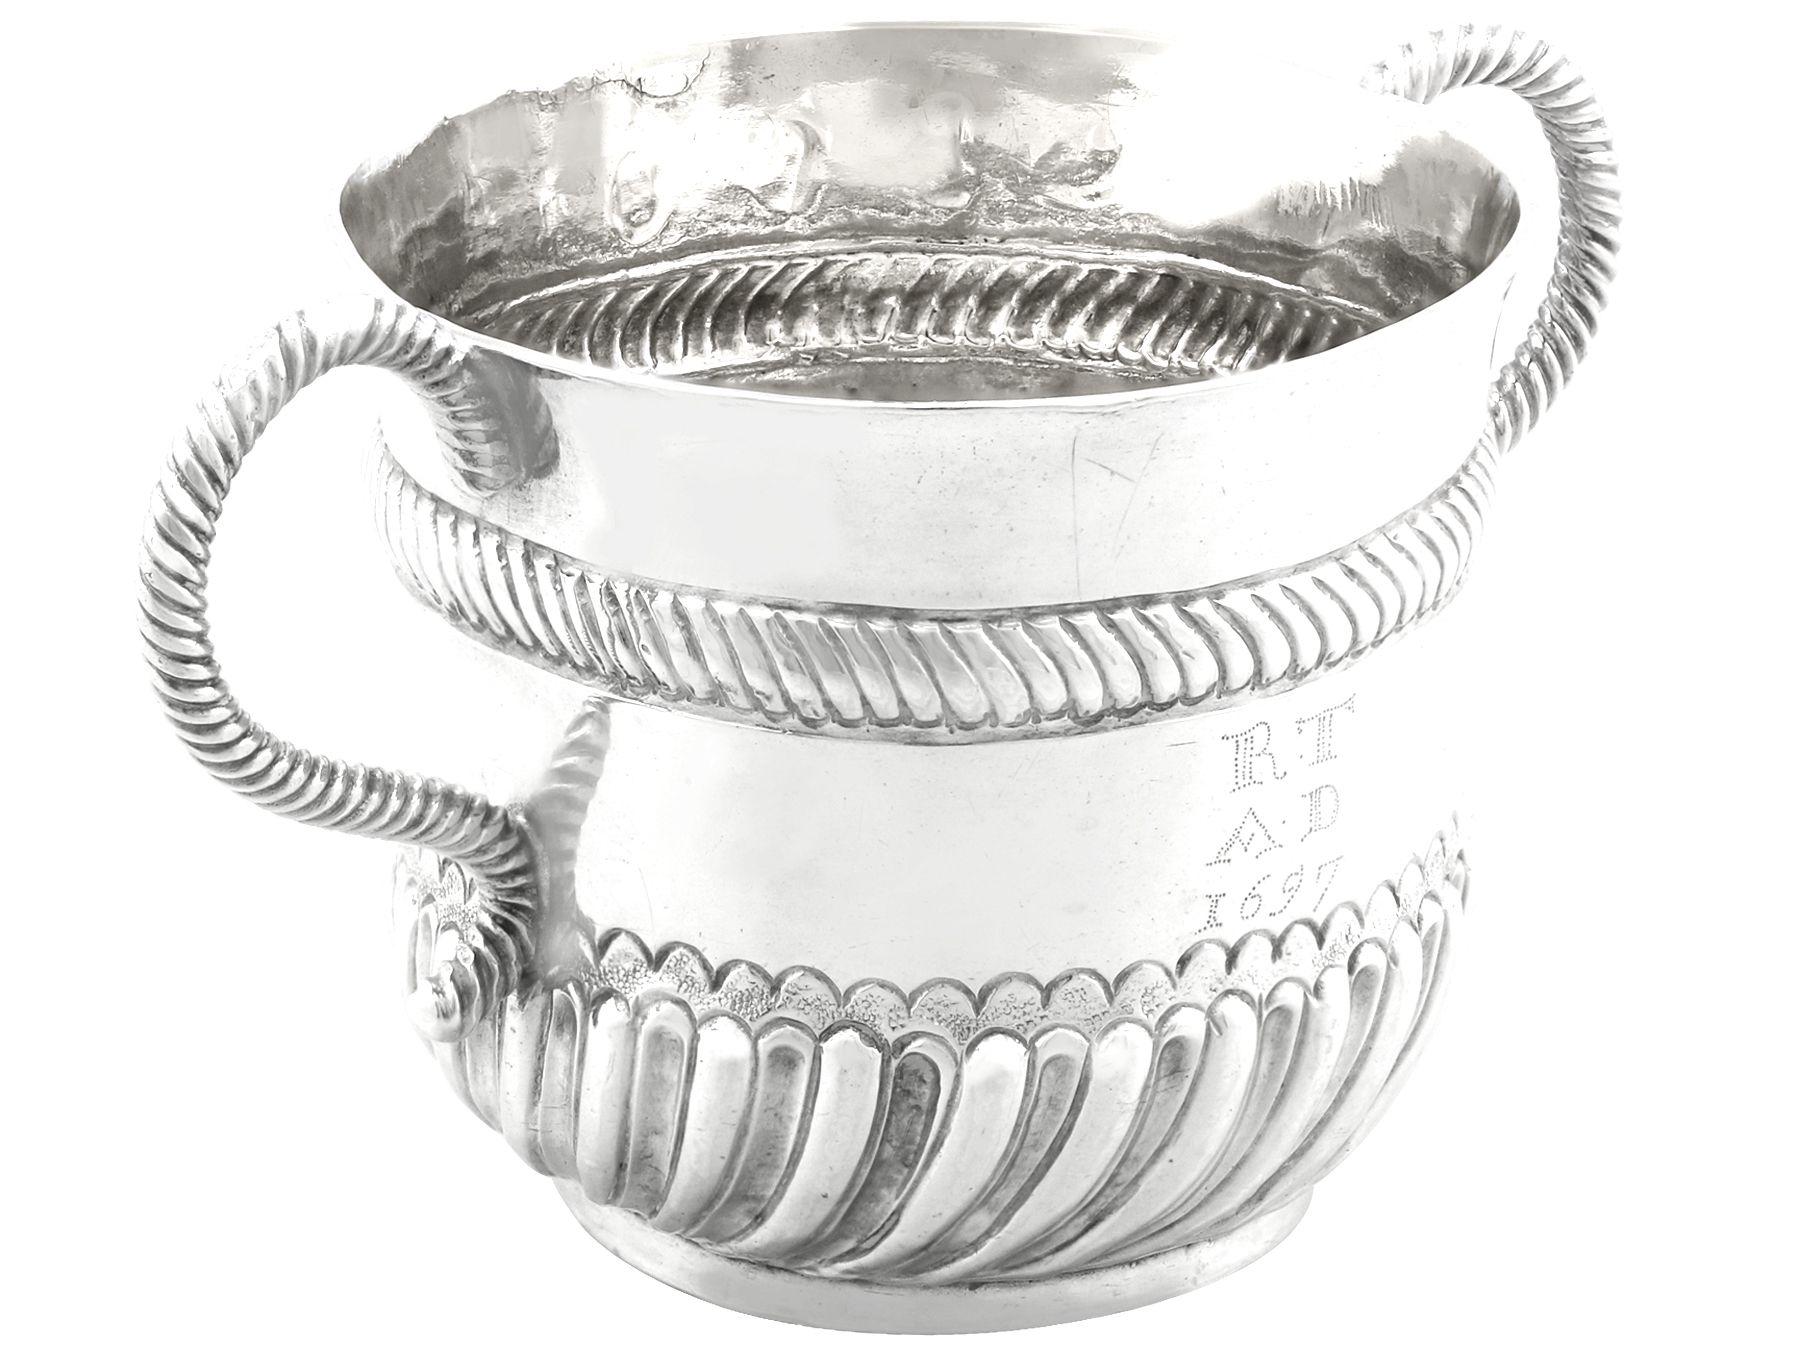 An exceptional, fine and impressive antique William III English Britannia silver porringer, an addition to our 18th century silverware collection.

This antique William III Britannia standard silver porringer has a circular rounded form.

The